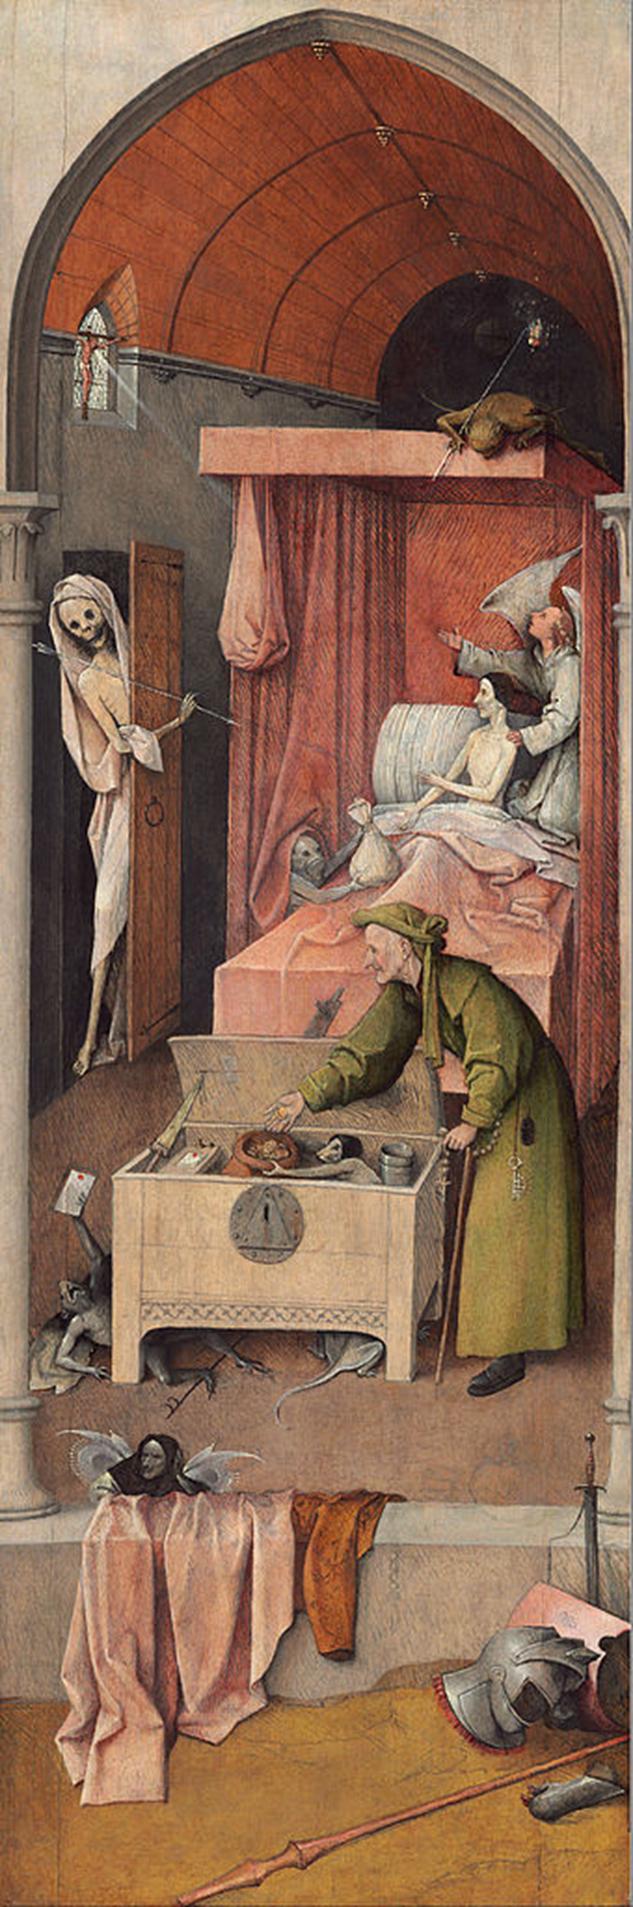 https://upload.wikimedia.org/wikipedia/commons/thumb/2/2a/Hieronymus_Bosch_-_Death_and_the_Miser_-_Google_Art_Project.jpg/340px-Hieronymus_Bosch_-_Death_and_the_Miser_-_Google_Art_Project.jpg